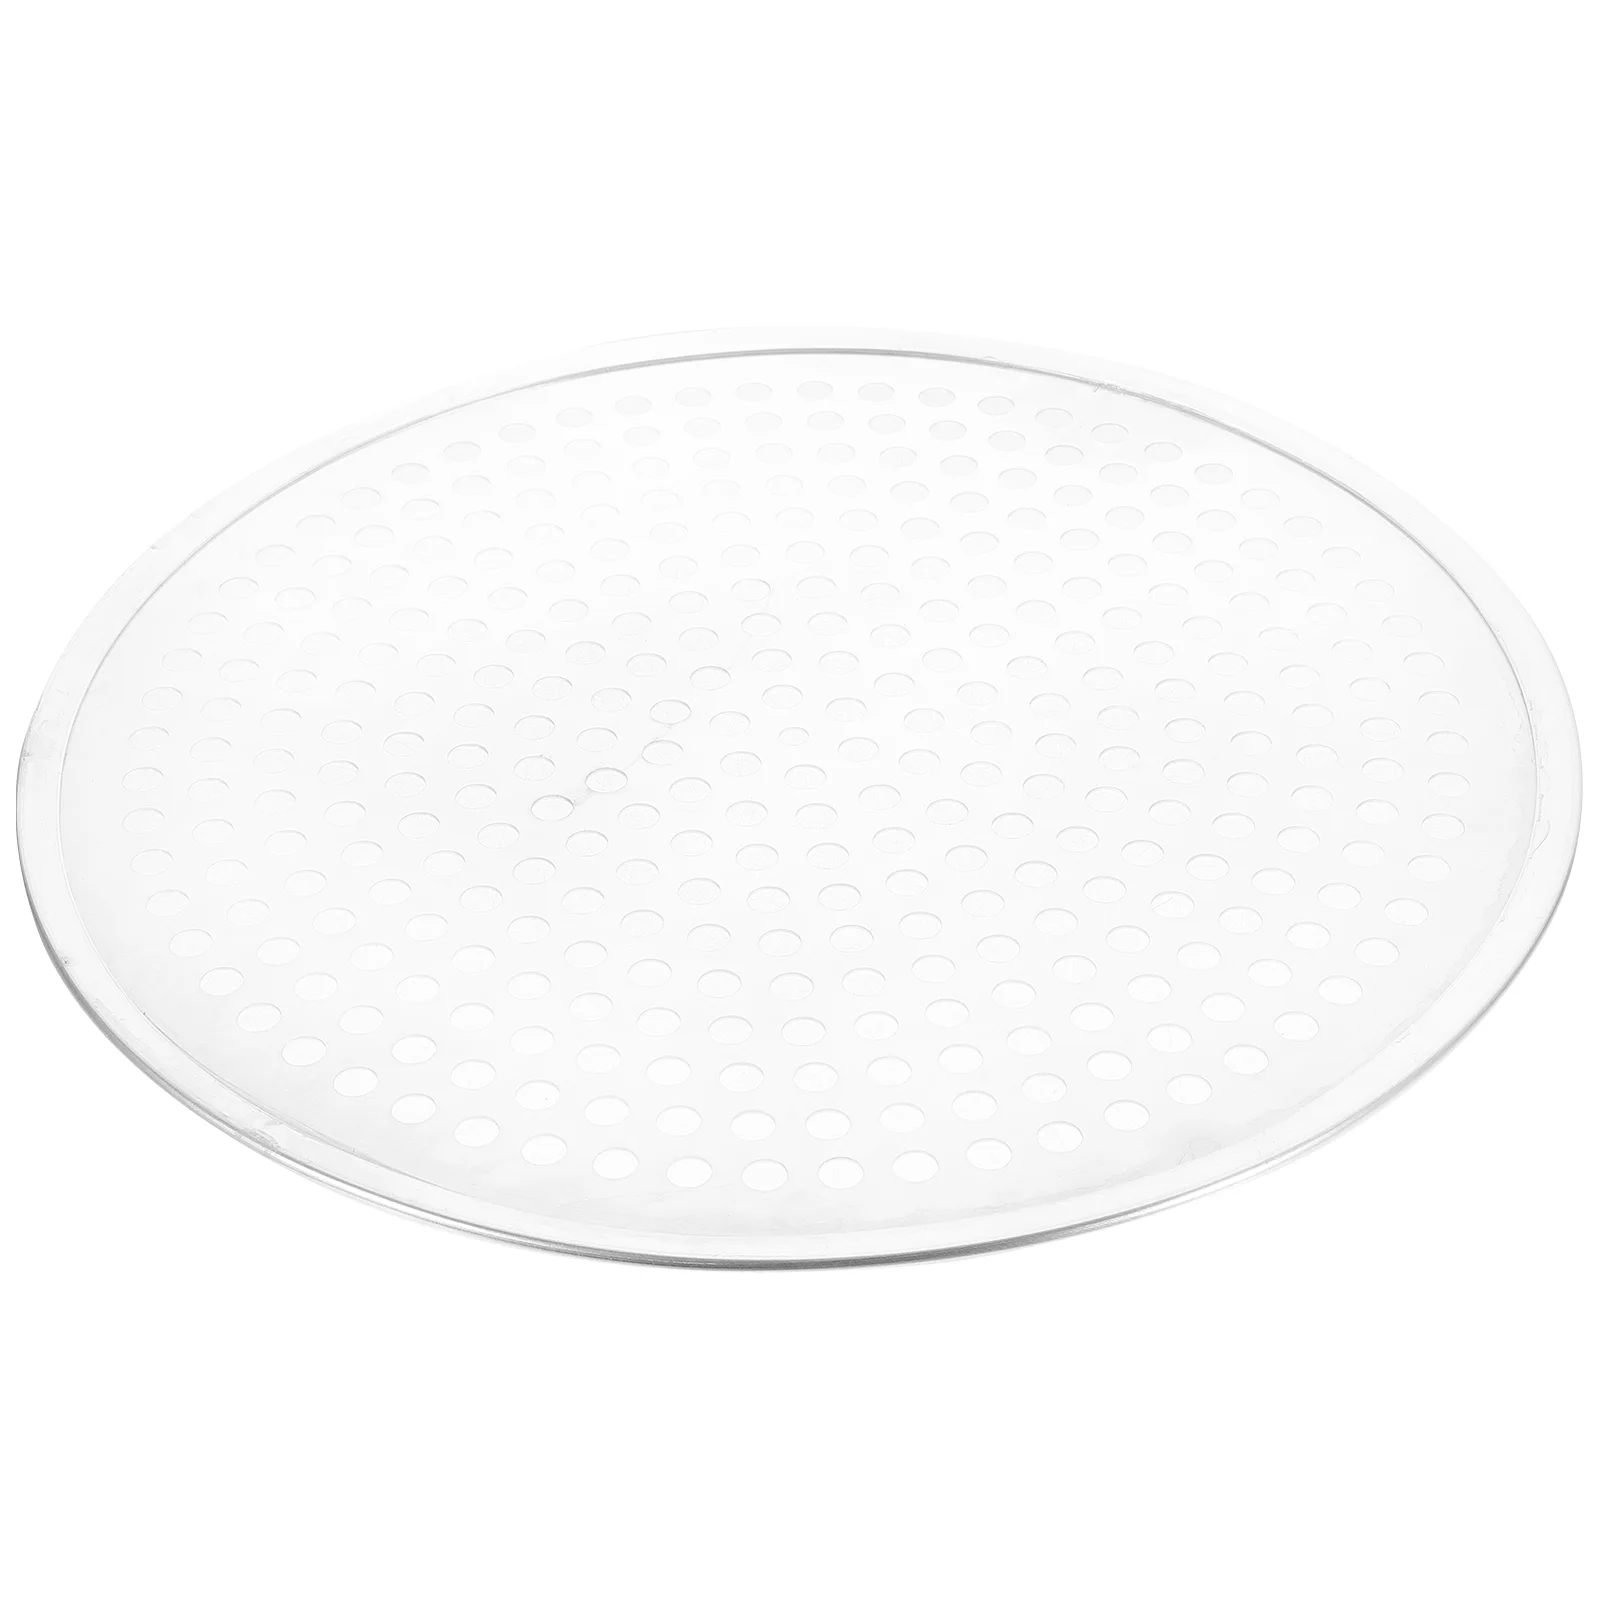 

Round Pizza Pan Aluminium Alloy Pizza Tray Round Perforated Pizza Baking Tray Pan with Holes for Home Oven Nonstick Roasting Net